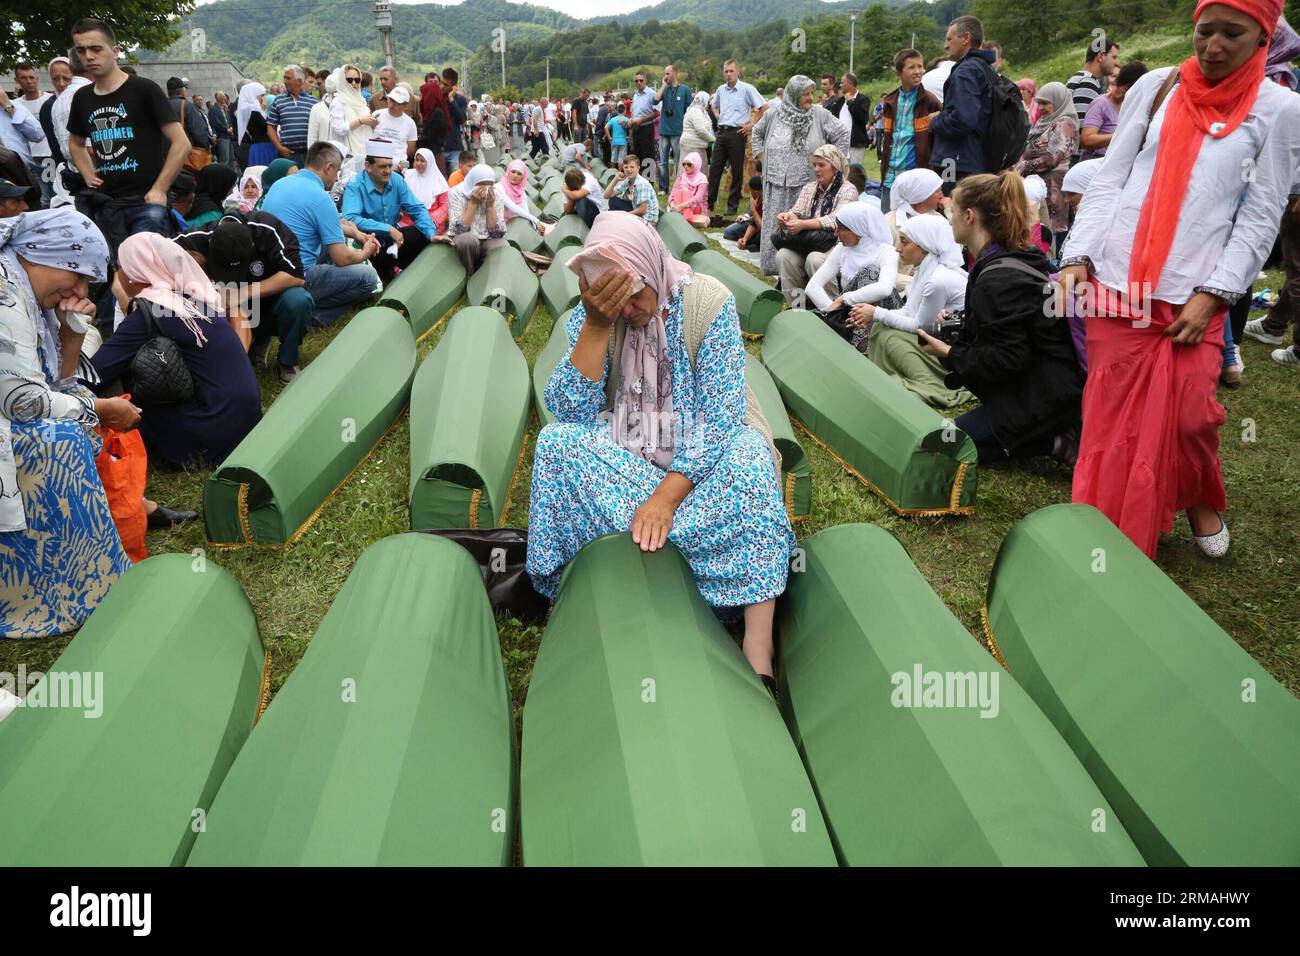 Relatives sitting next to coffins of the victims mourn before a funeral in Potocari, near Srebrenica, Bosnia and Herzegovina, July 11, 2014. The funeral of 175 recently identified victims was held here Friday to commemorate the 19th anniversary of the Srebrenica massacre. Some 7,000 Muslim men and boys were massacred in and near Srebrenica by Bosnian Serb forces in July 1995, the worst massacre in Europe since the end of World War II. Xinhua/Haris Memija zjl BIH-SREBRENICA-MASSACRE-19TH ANIVERSARY PUBLICATIONxNOTxINxCHN Stock Photo